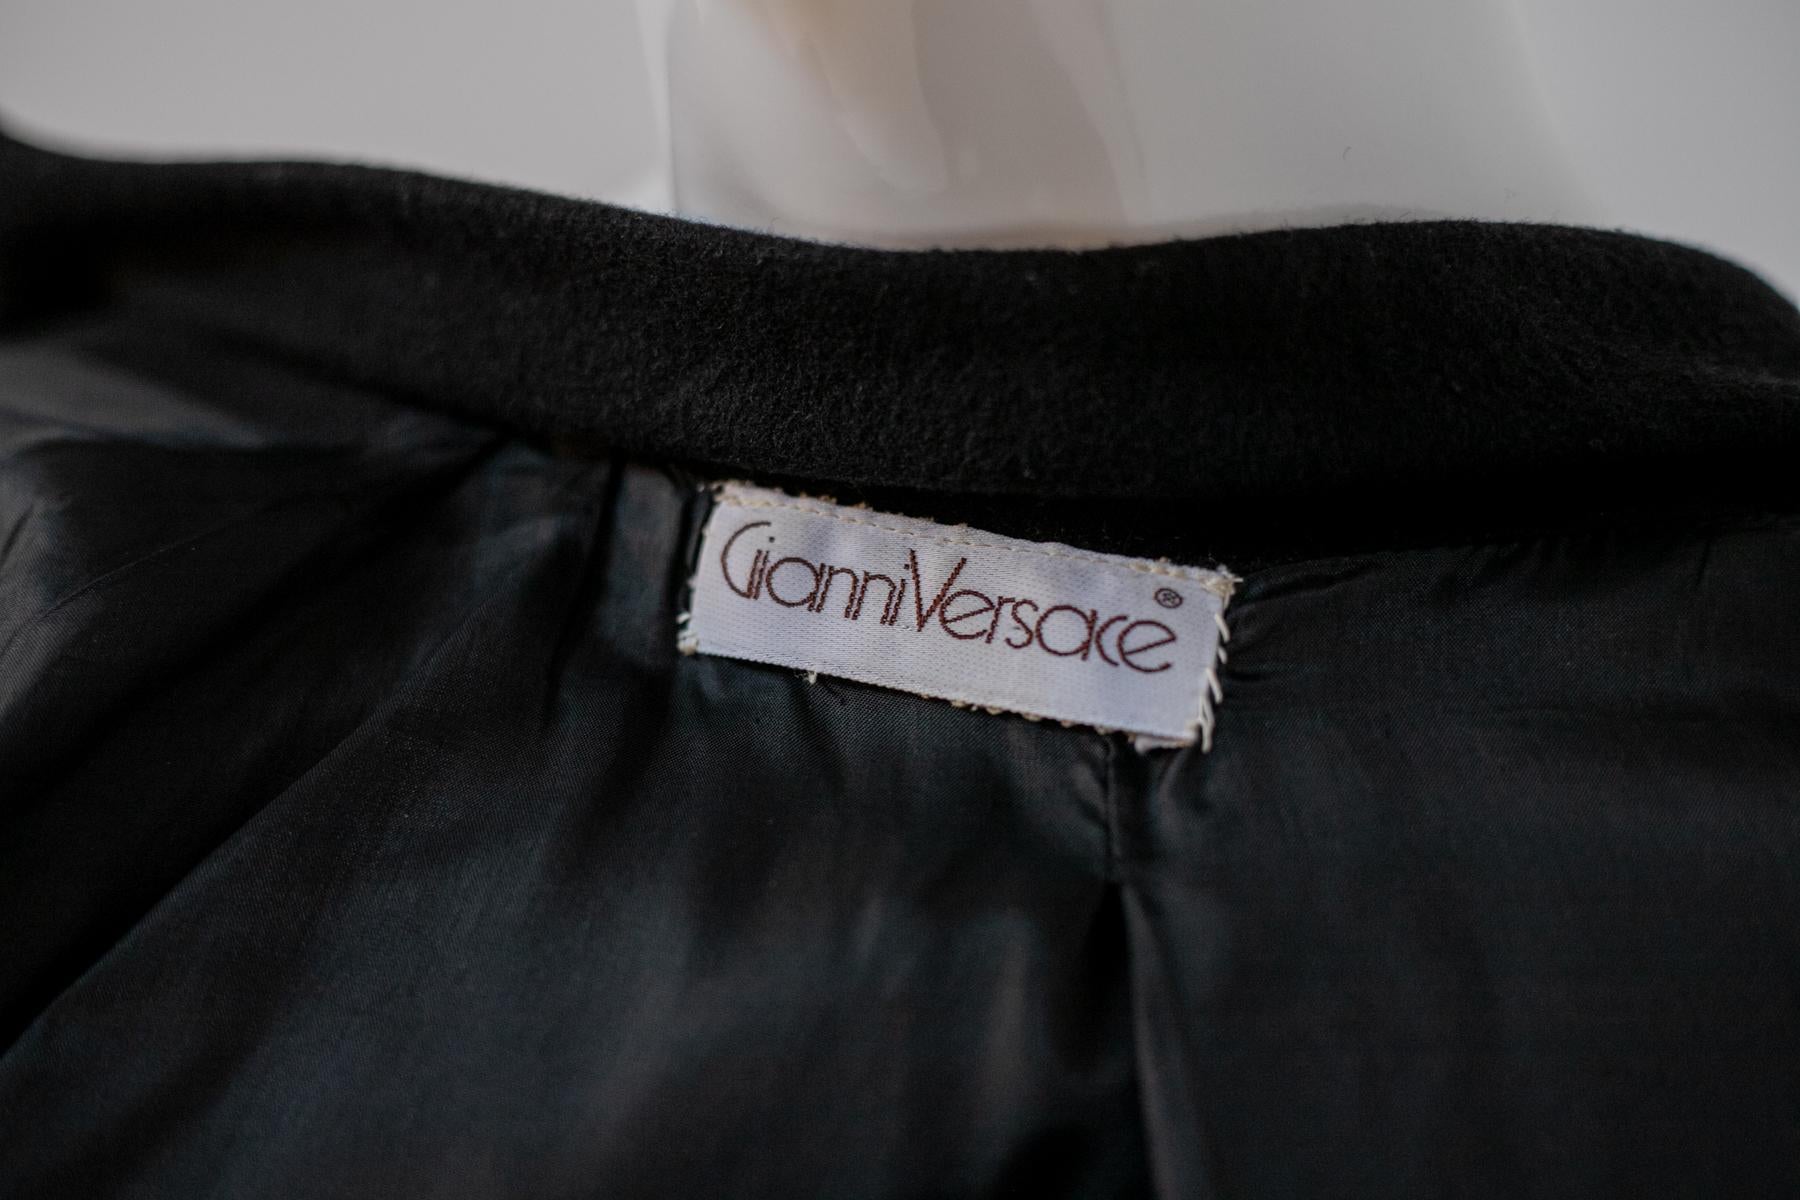 Gorgeous vintage wool and velvet jacket made in the 1990s by Gianni Versace, made in Italy. ORIGINAL LABEL.
The jacket has a collared neckline, with a standard cut collar that connects to the central part of the jacket, composed double-breasted with